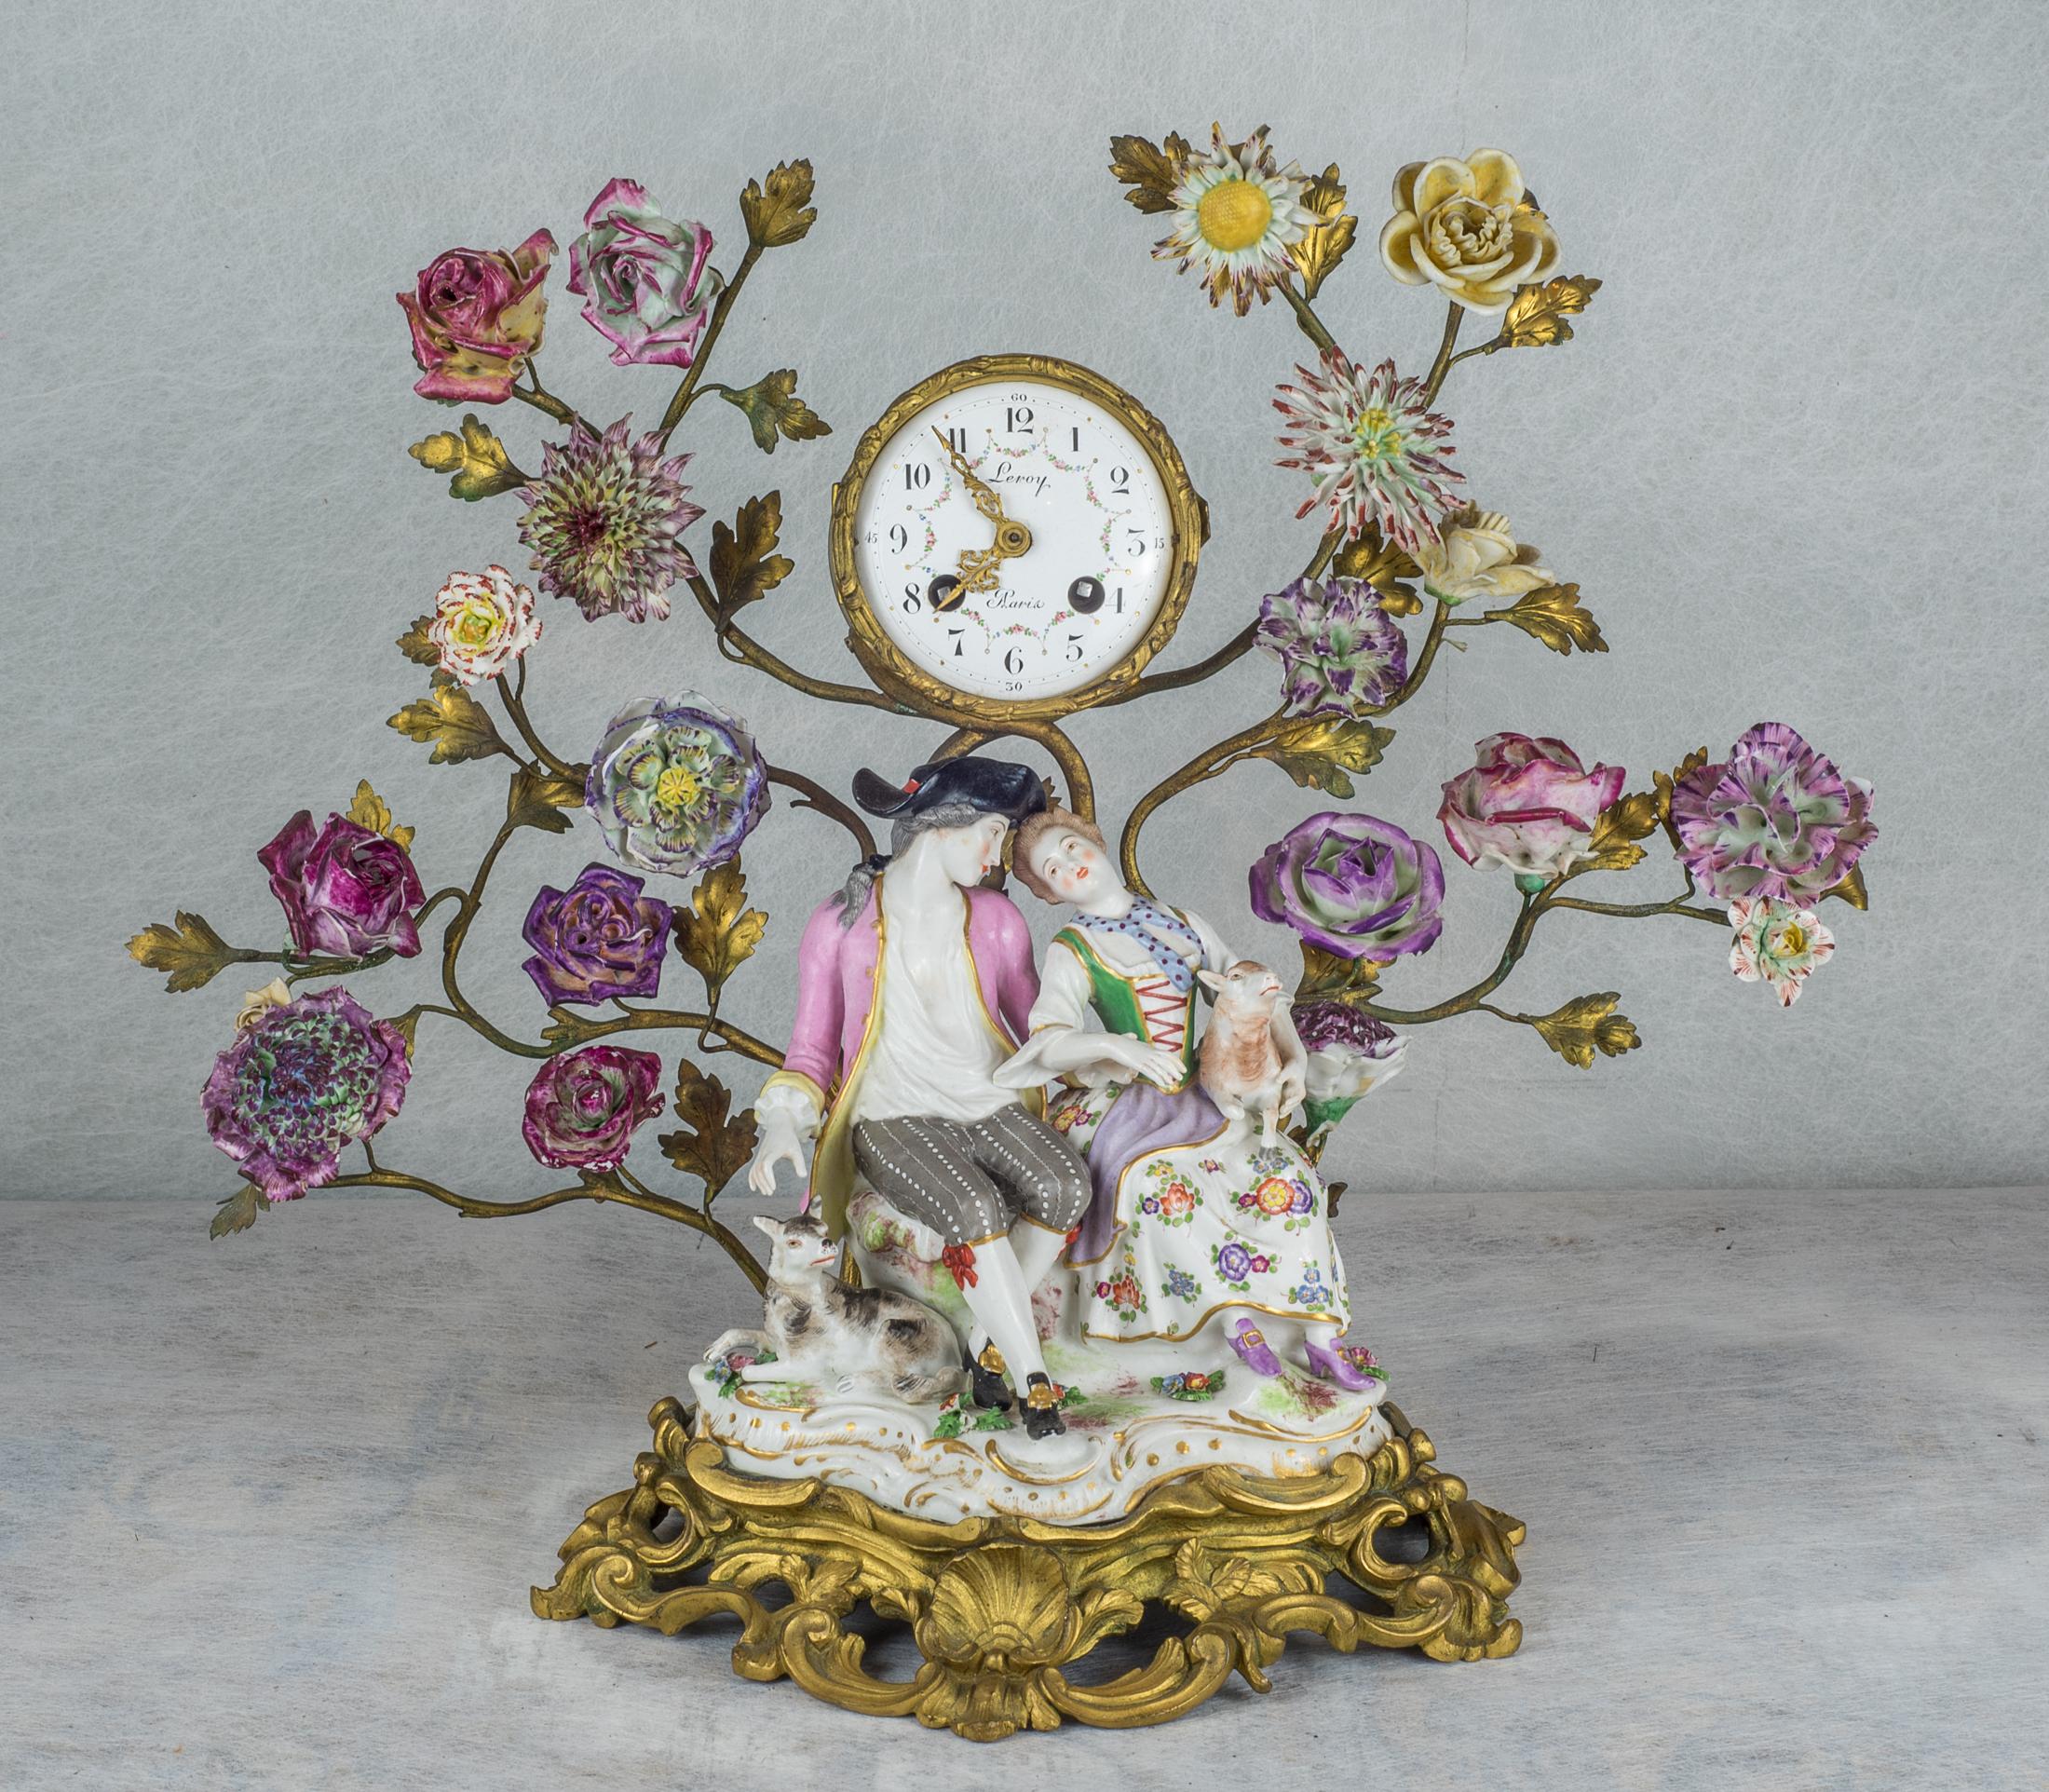 A fine French gilt-bronze and porcelain clockset with figural group and porcelain flowers.

The figural group modeled as 18th century lovers, the woman carrying a lamb, a dog beside the gentleman, another gentleman playing a flute with a dog